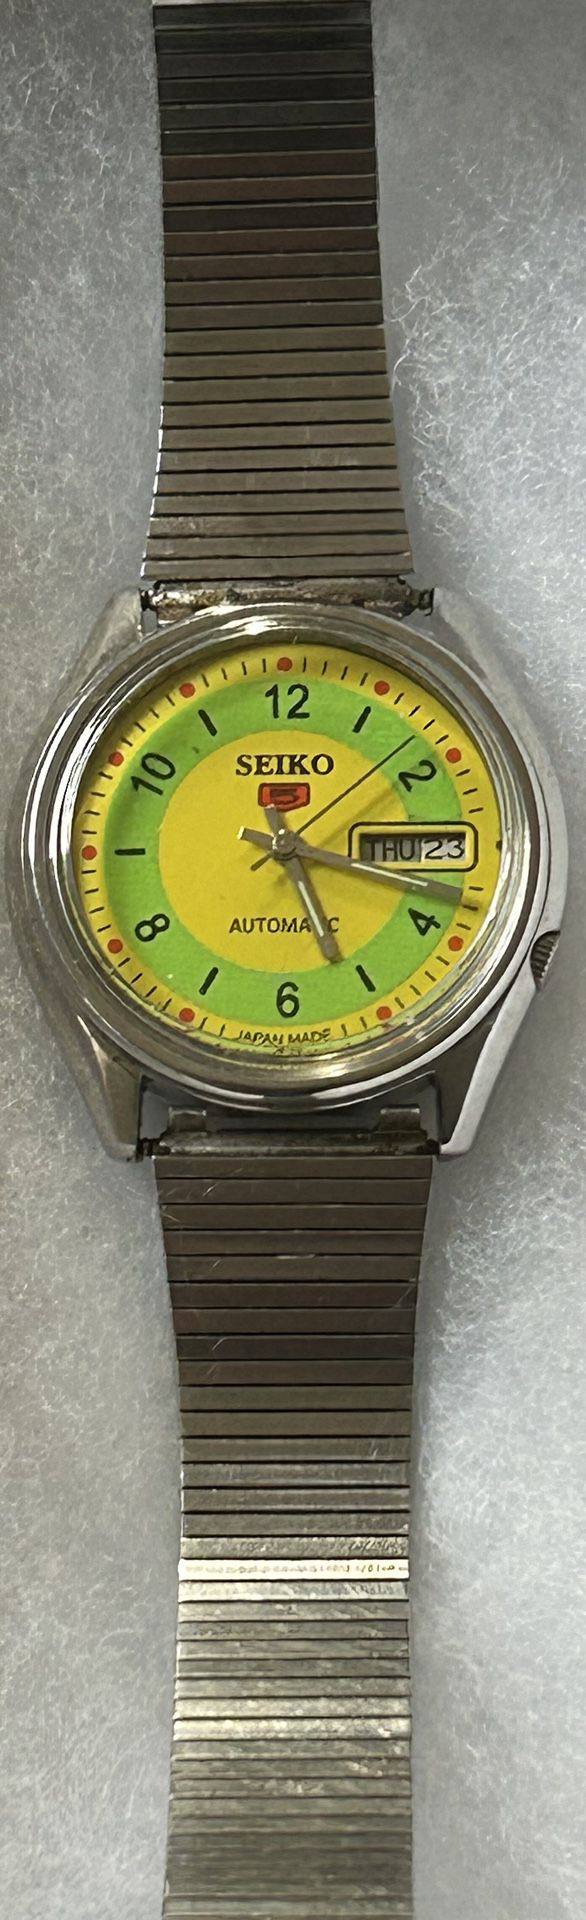 Seiko 5 Automatic With Vintage Steel Band 